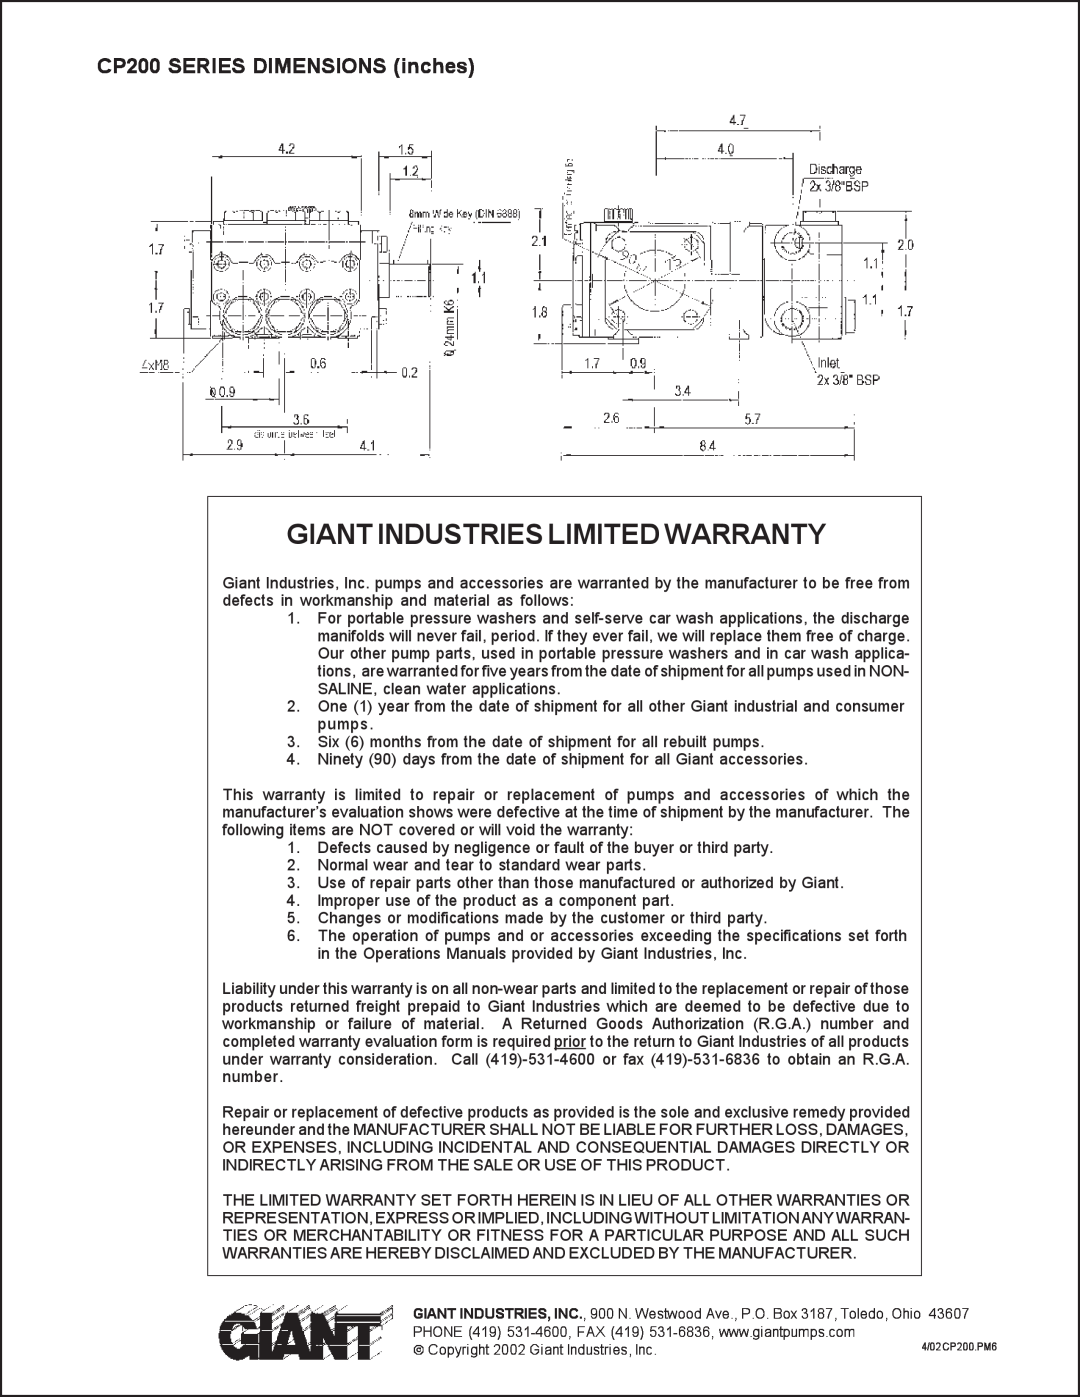 Giant CP218, CP230, CP220 service manual Giant Industries Limited Warranty, CP200 SERIES DIMENSIONS inches 